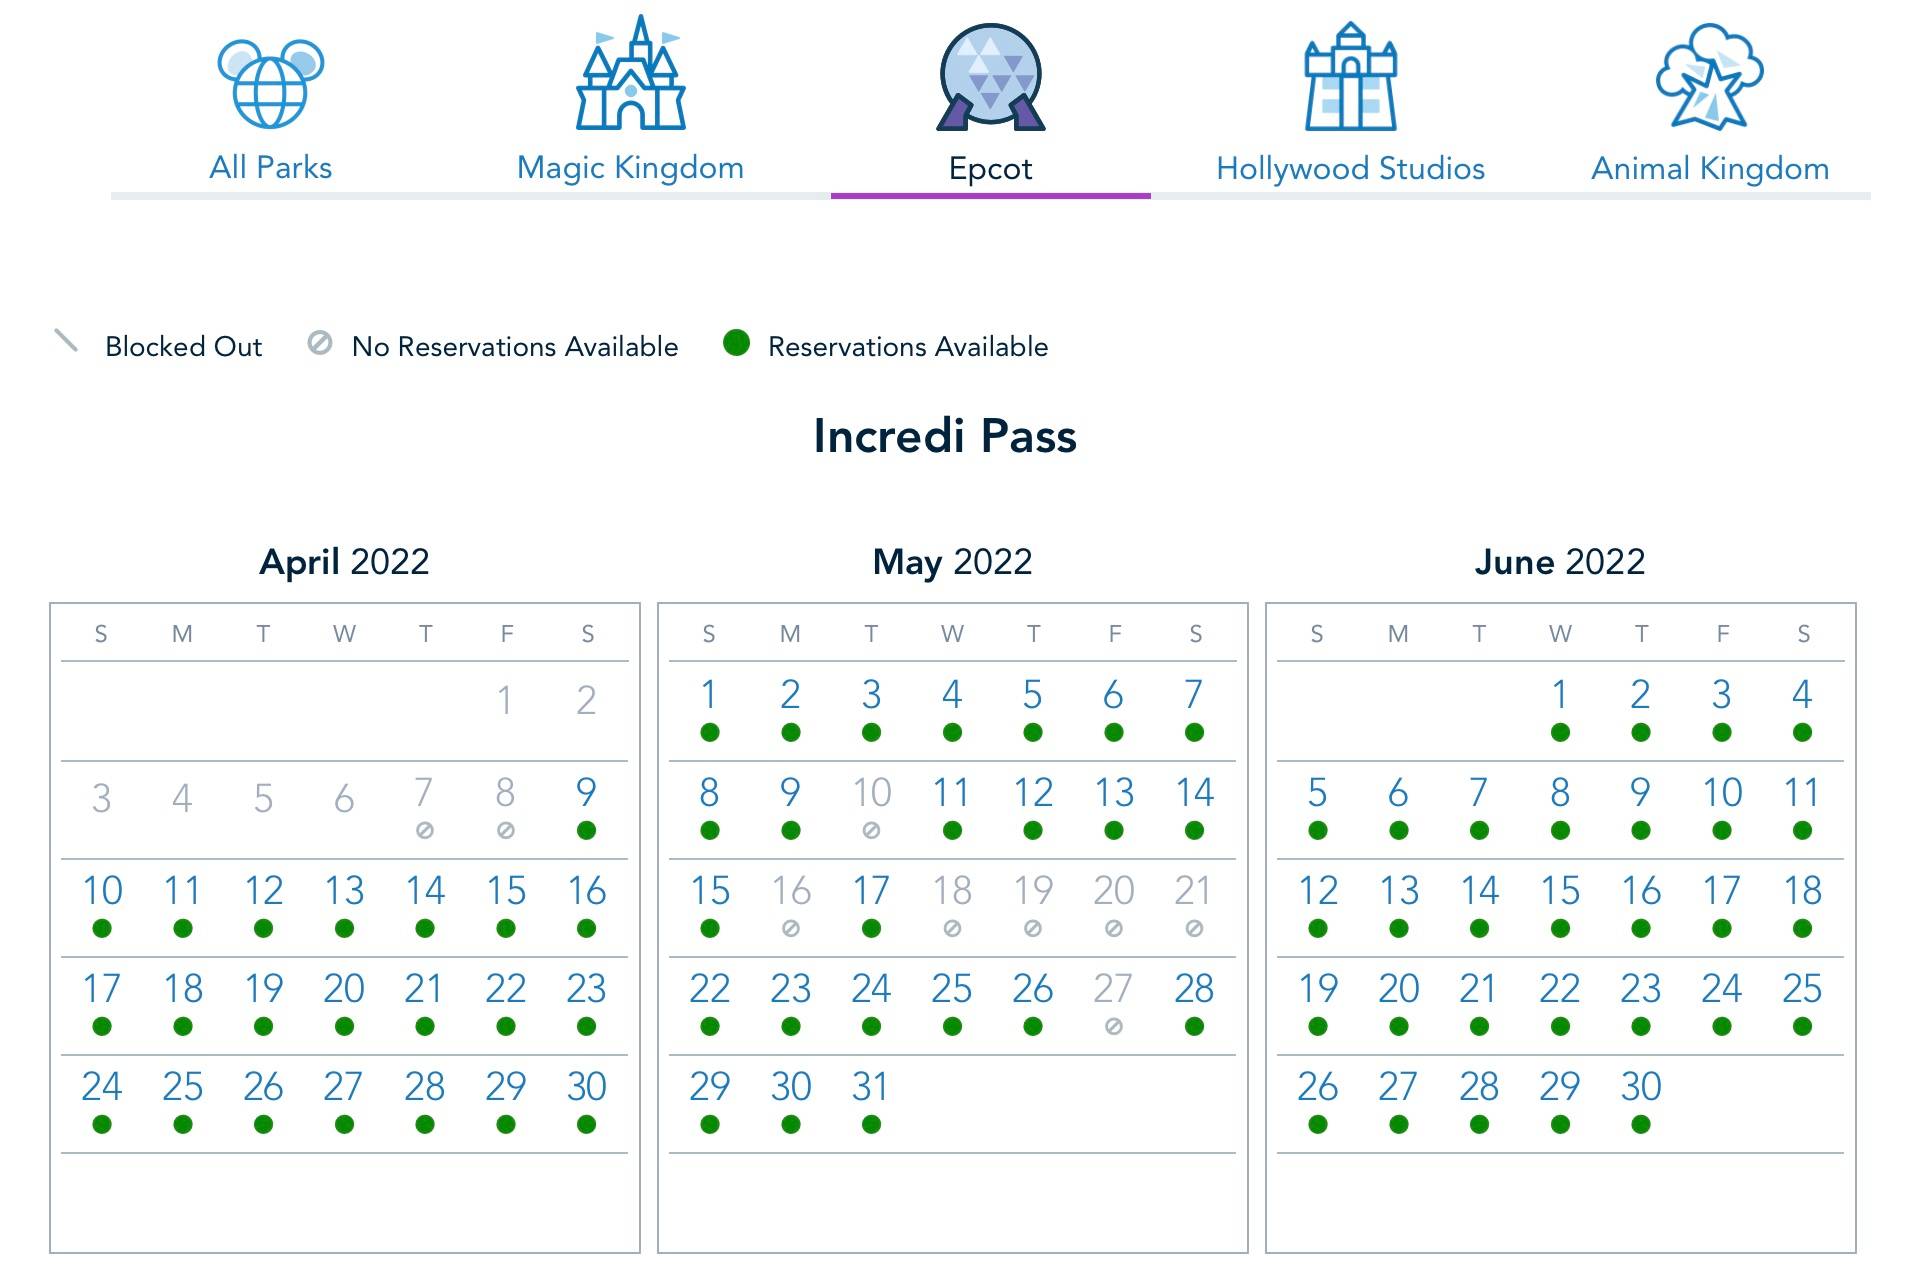 EPCOT Park Pass Availability at capacity for May 27 for Passholders